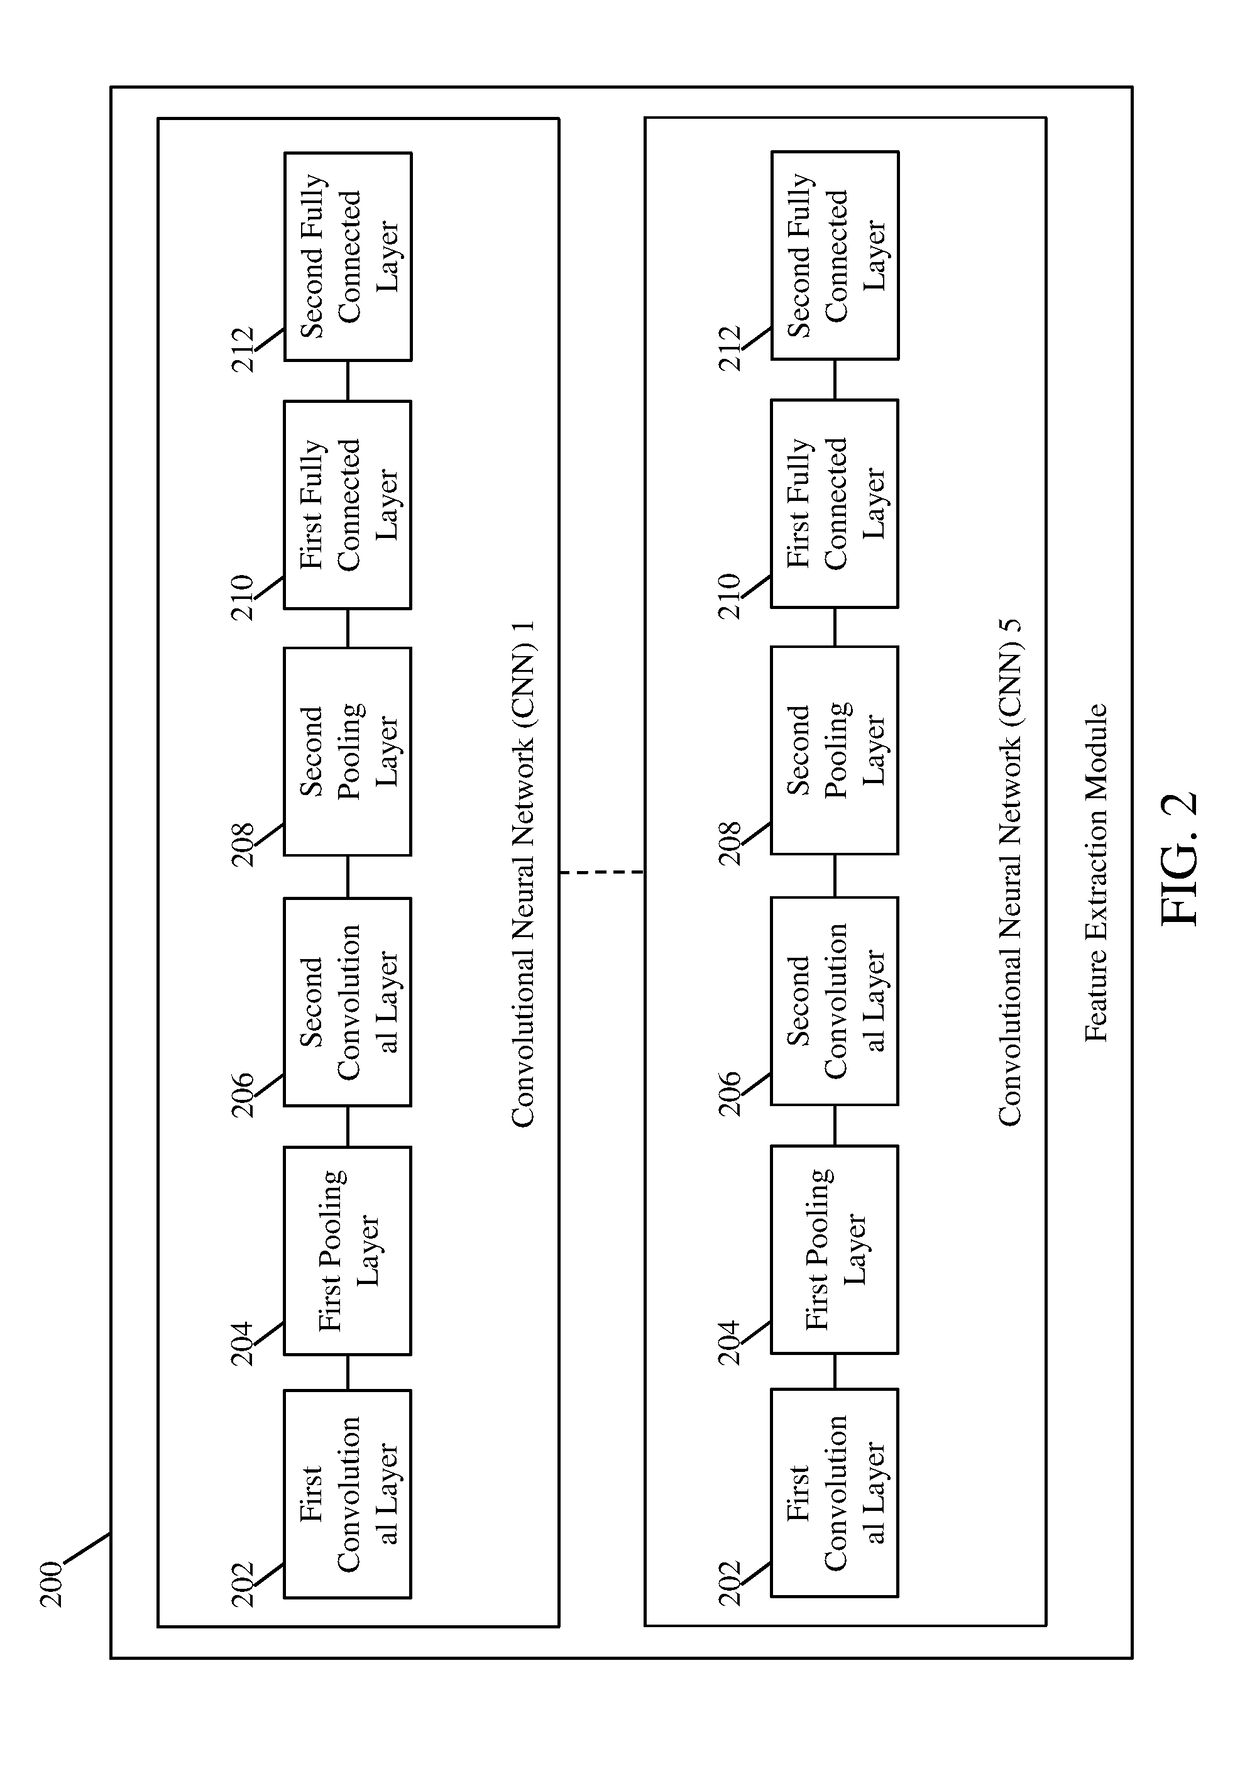 System and method for detecting retinopathy